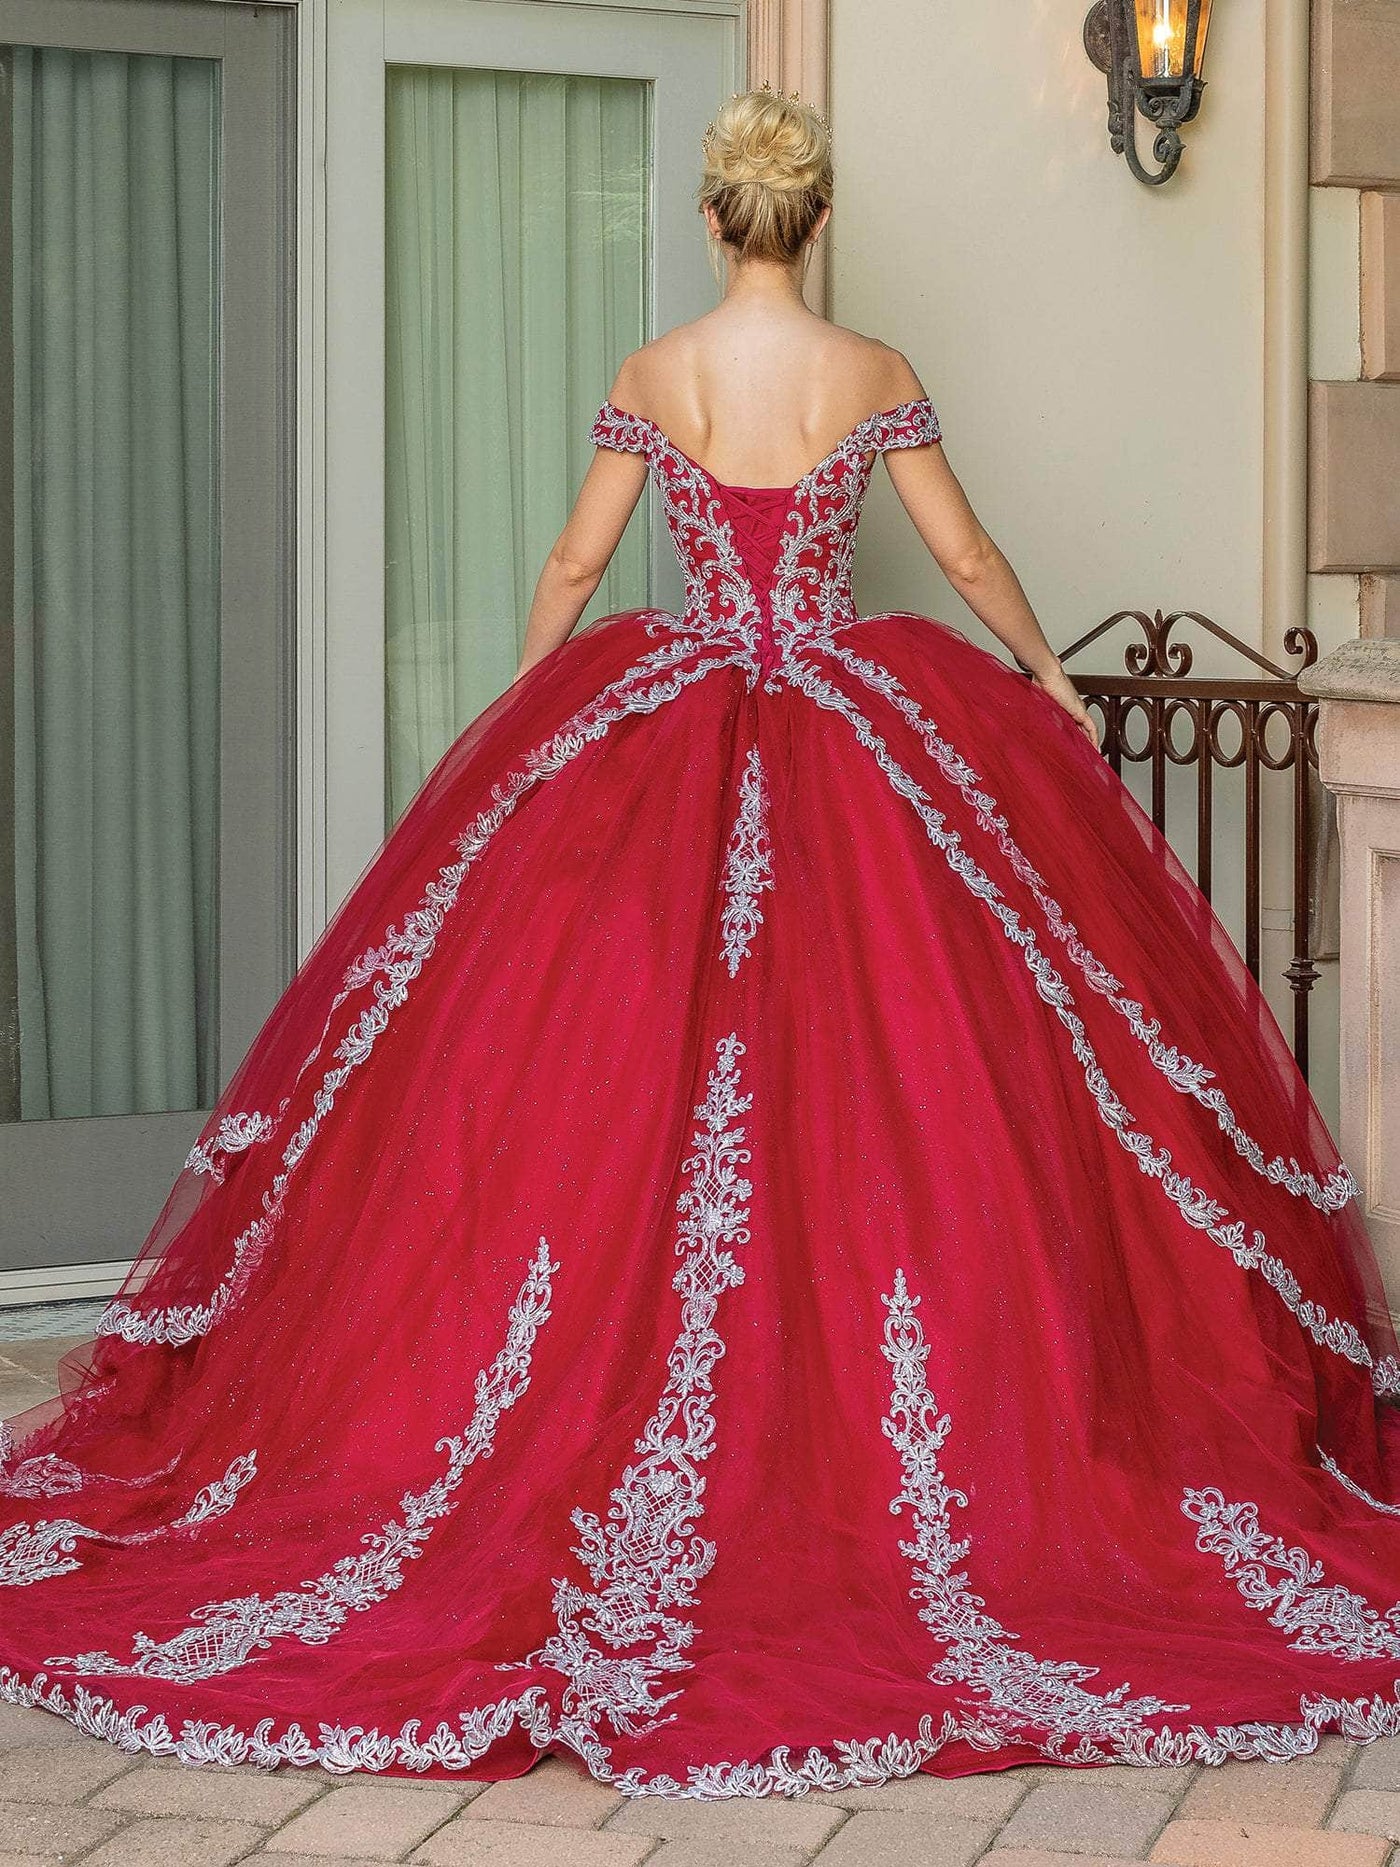 Dancing Queen 1662 - Sweetheart Embroidered Ballgown Ball Gowns